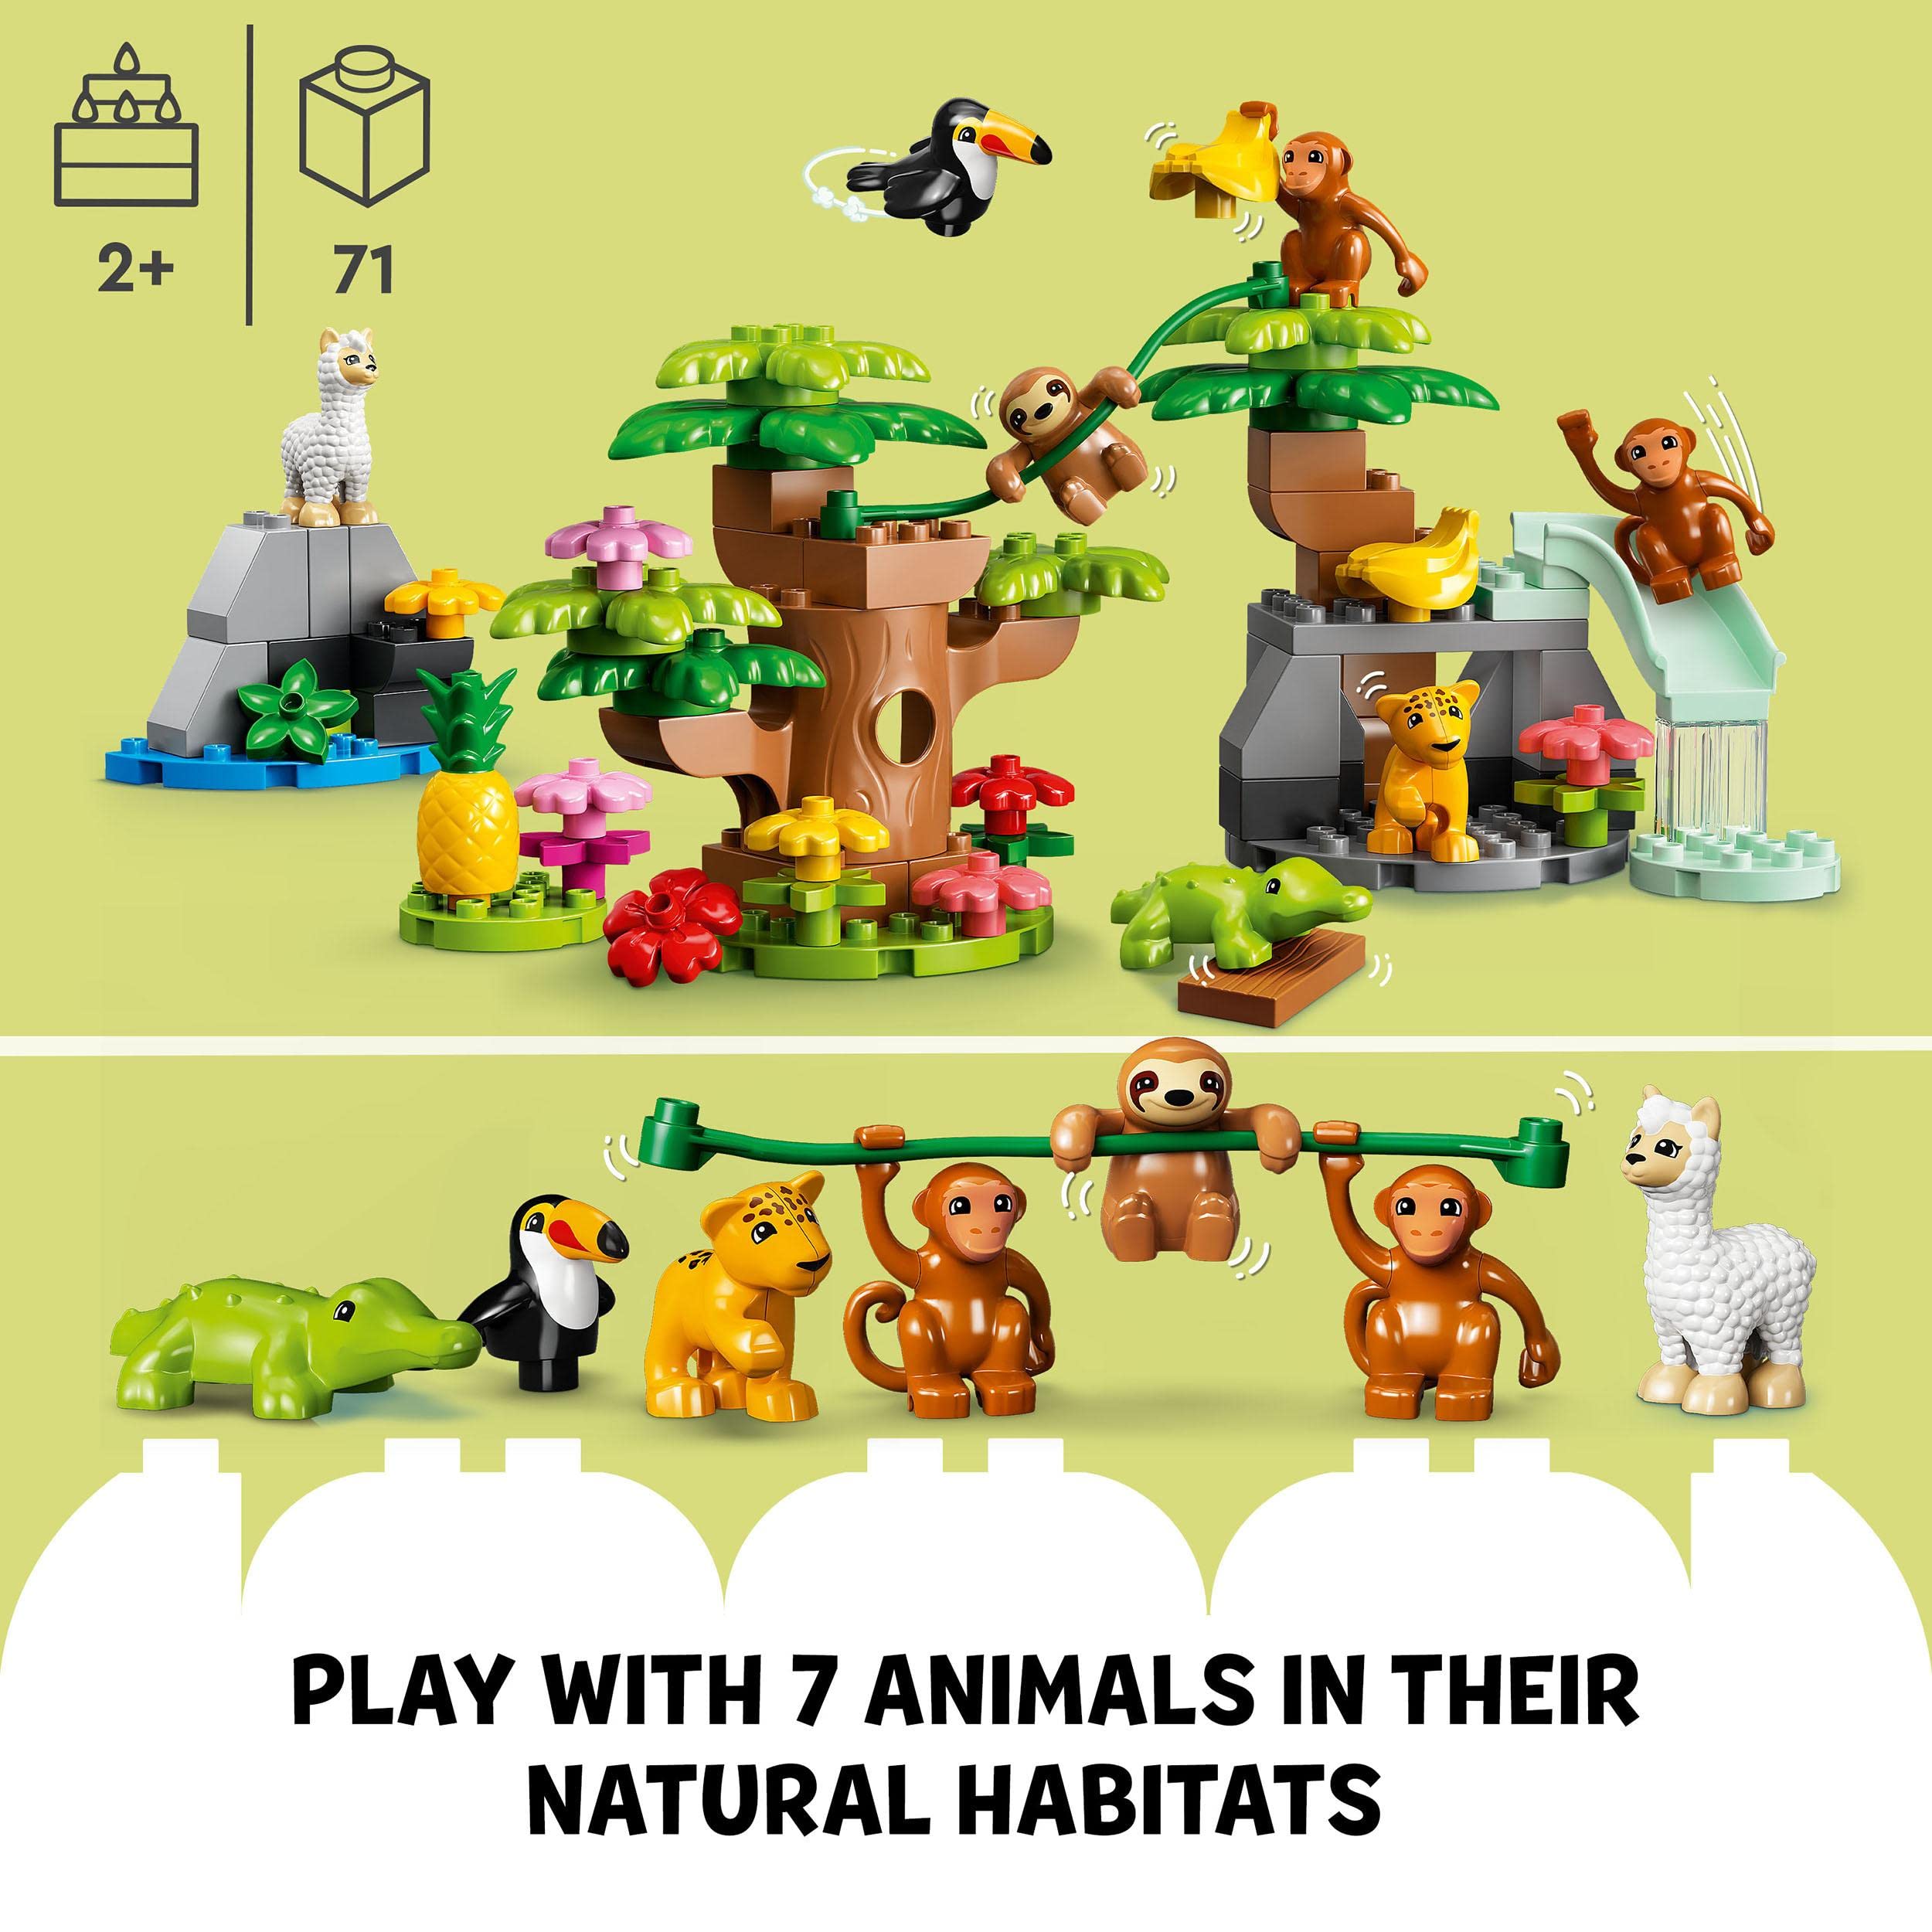 Mua LEGO 10973 DUPLO Wild Animals of South America Set, with 7 Toy Animal  Figures & Jungle Playmat, Early Learning Toys for Toddlers Aged 2+ trên  Amazon Anh chính hãng 2023 | Giaonhan247